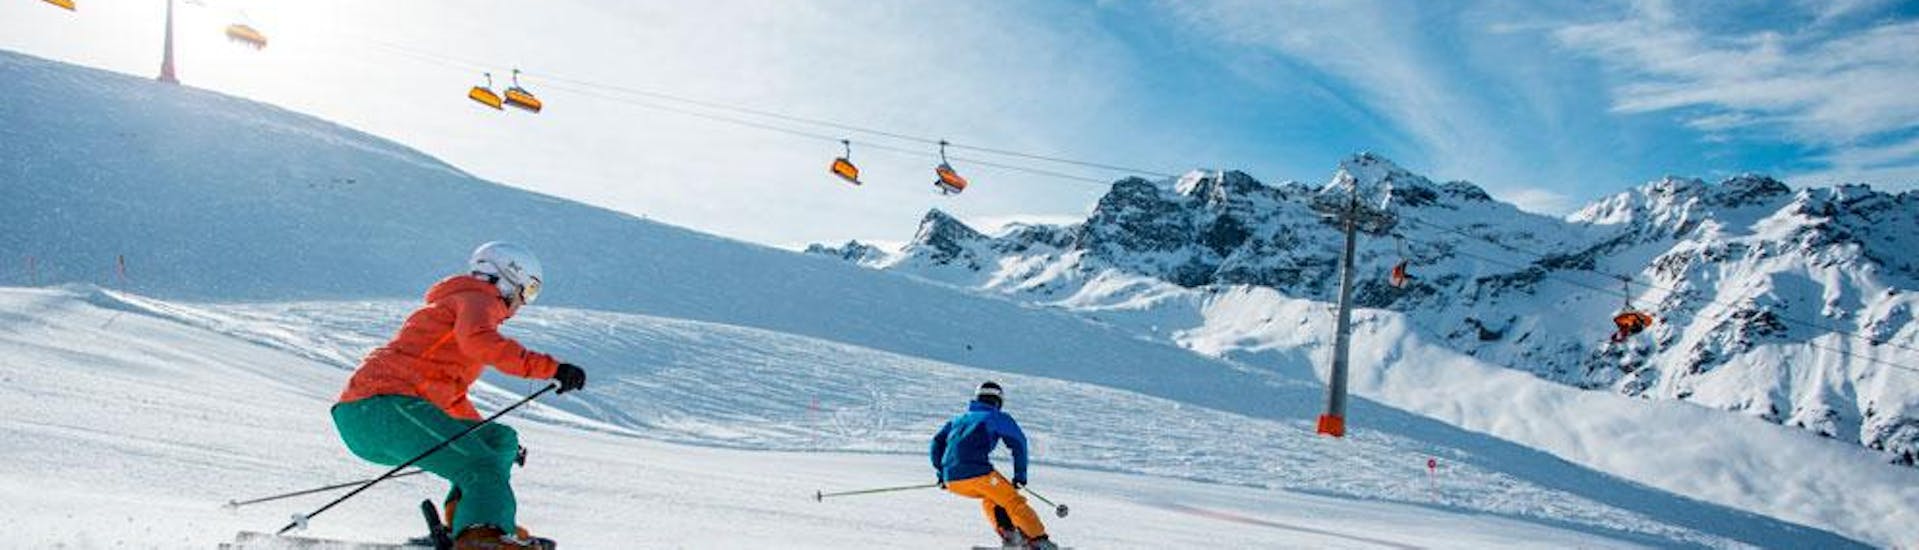 Skiers on the slopes with rented skis from Sport Stöckl Gaschurn-Partenen.